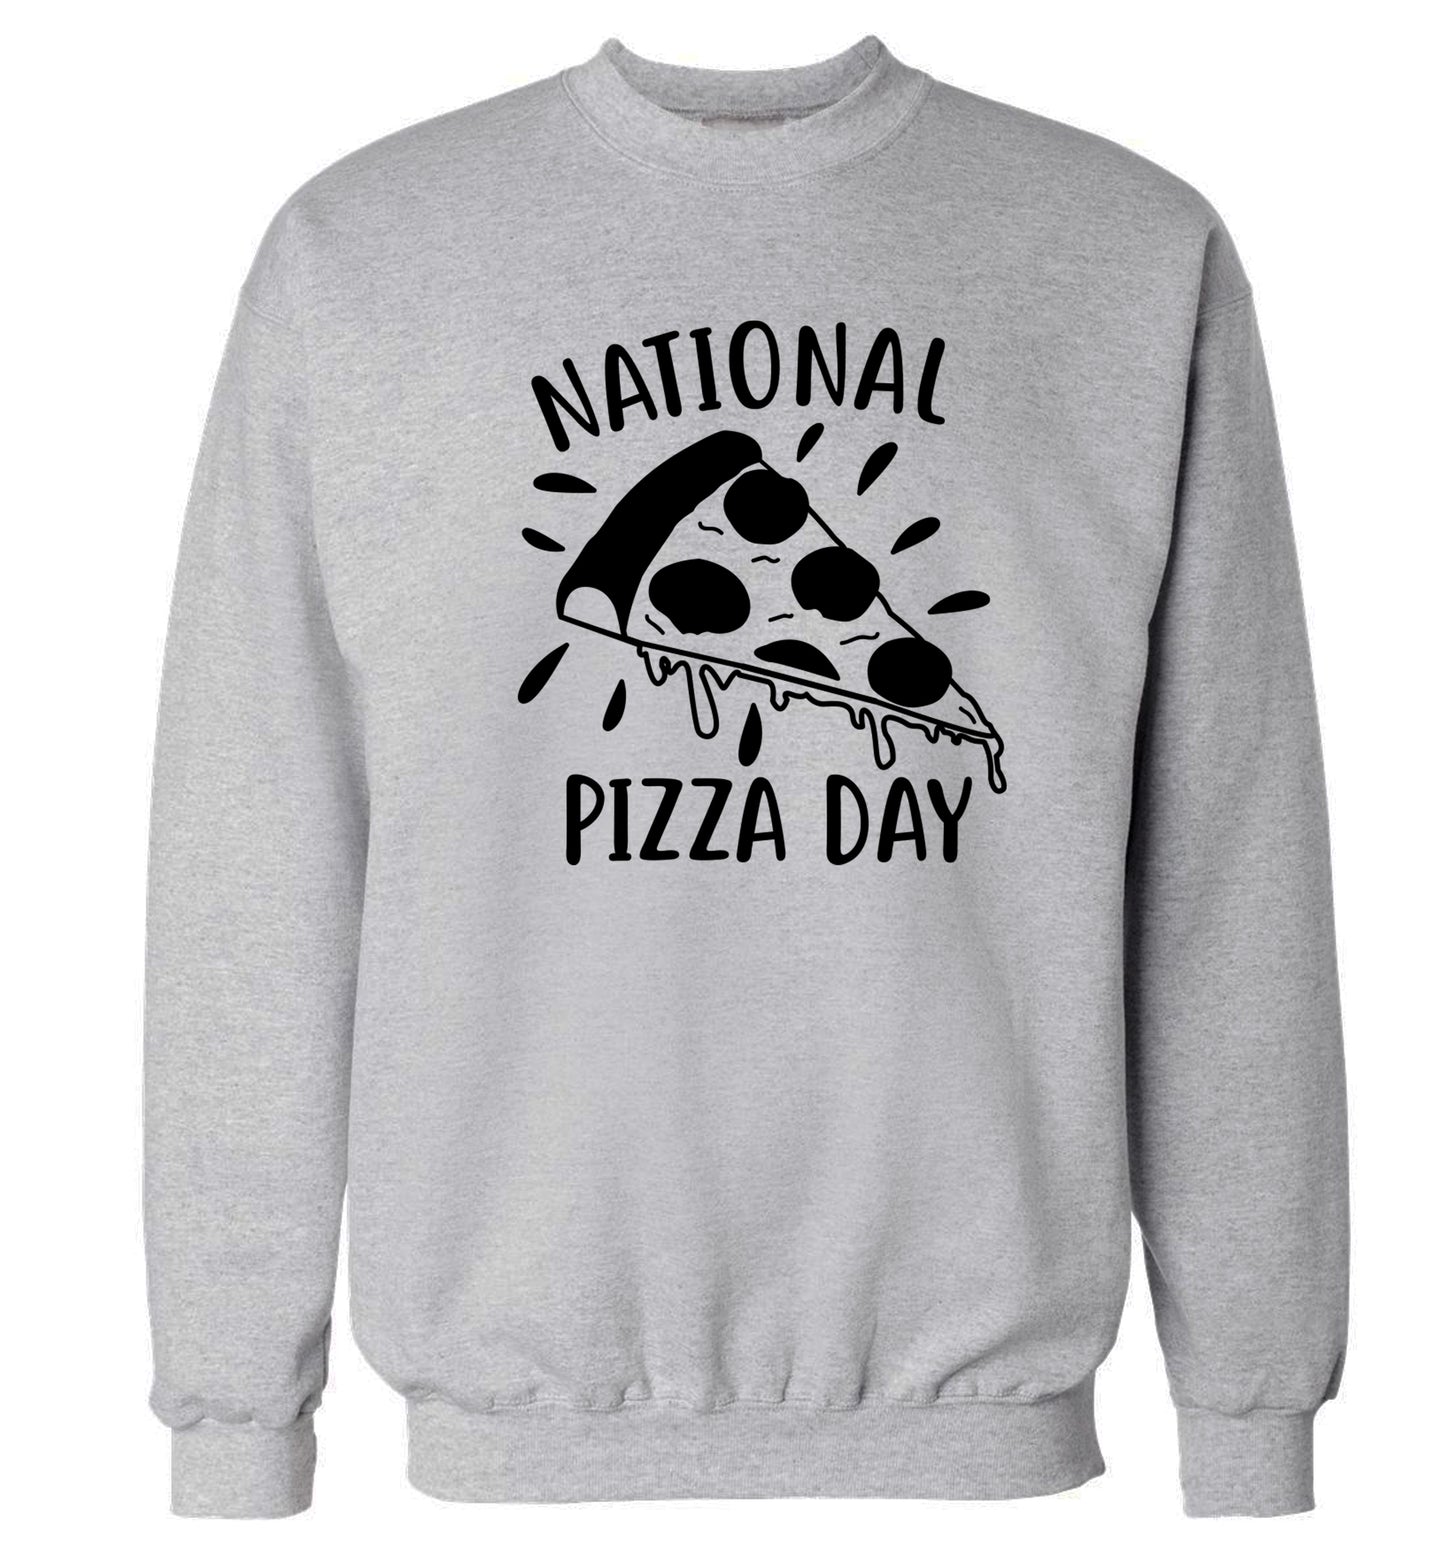 National pizza day Adult's unisex grey Sweater 2XL